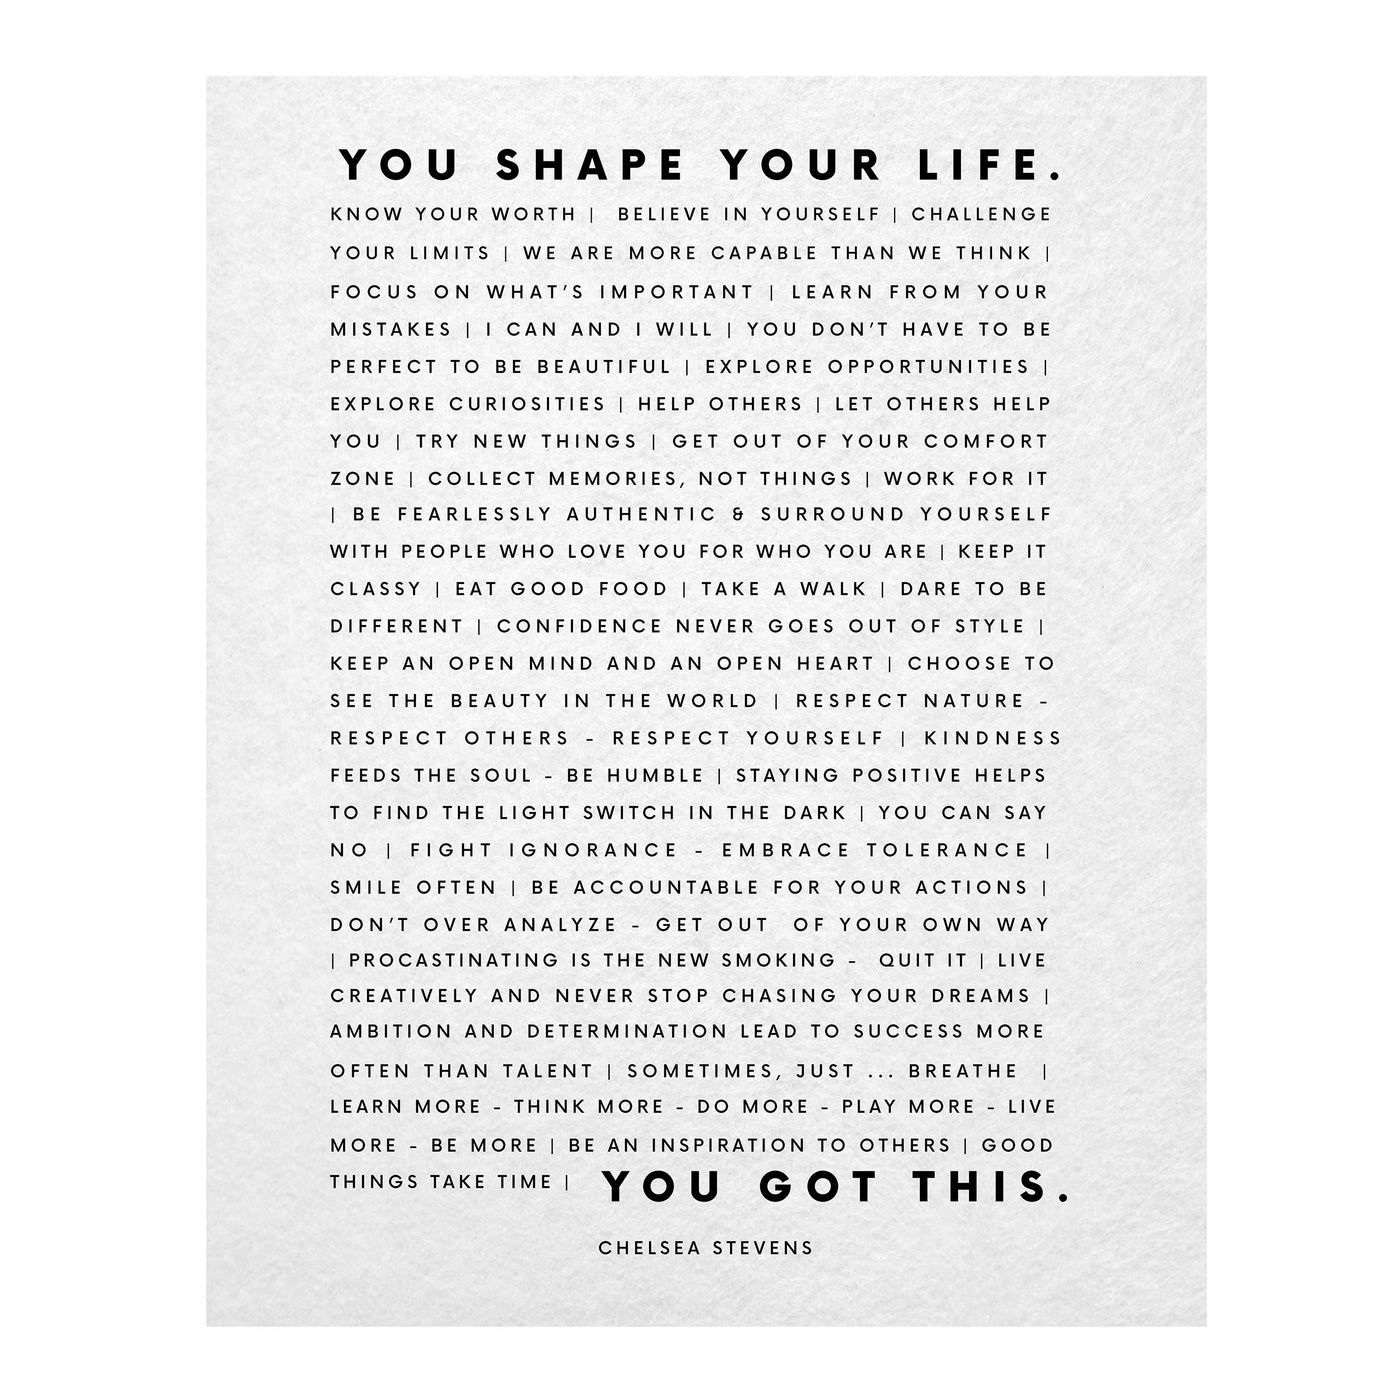 You Shape Your Life-You Got This- Motivational Quotes Wall Art Sign -11 x 14" Inspirational Typographic Print-Ready to Frame. Home-Office-School-Dorm Decor. Great Sign for Motivation & Inspiration!